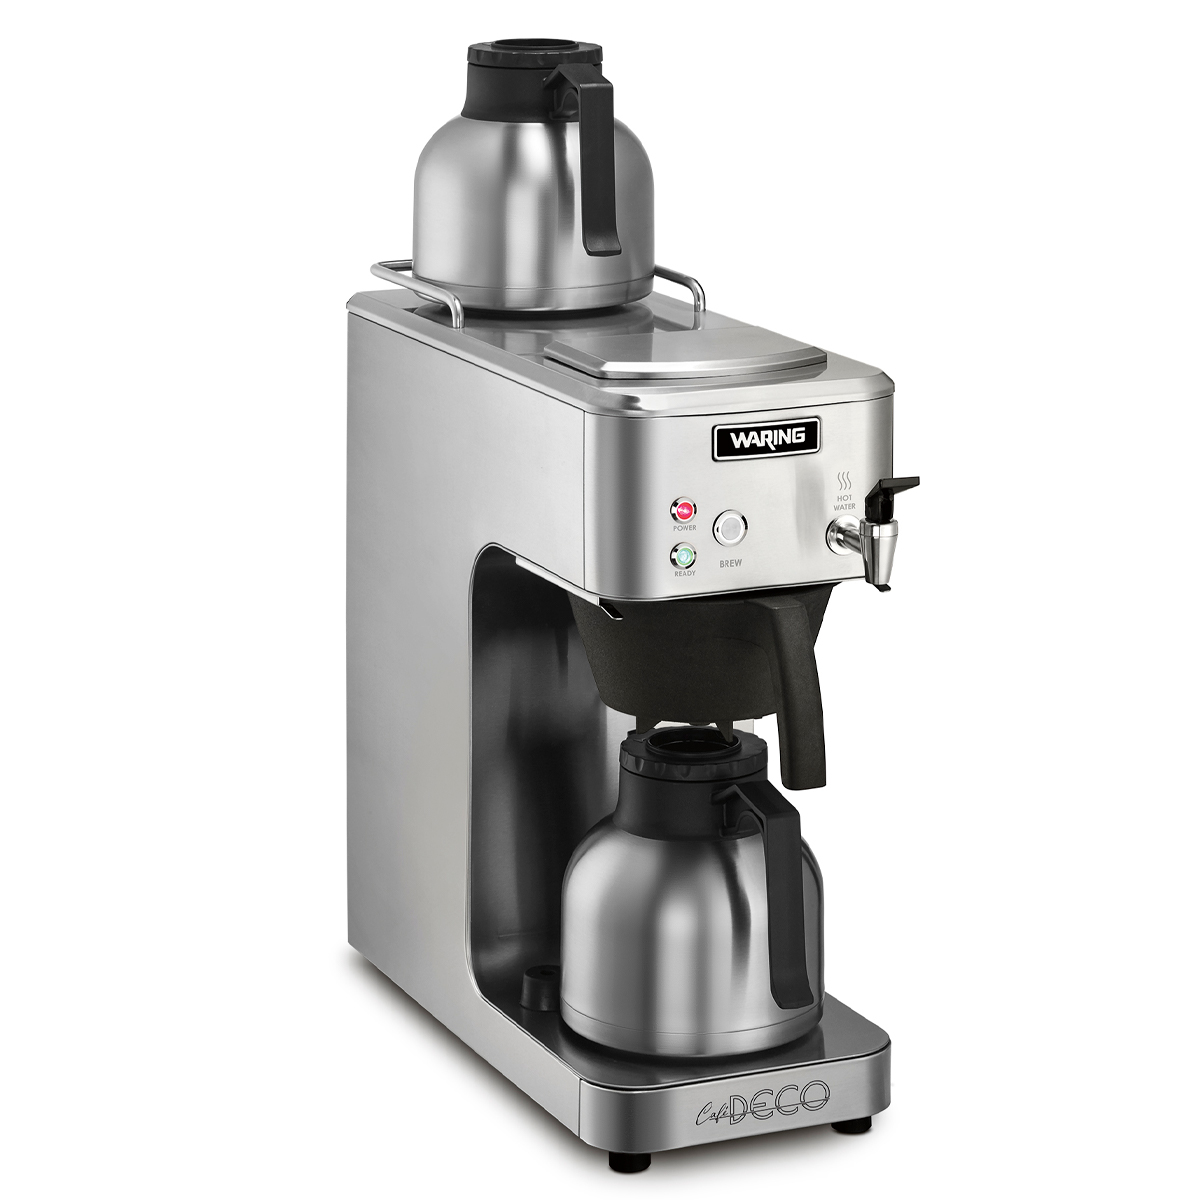 https://www.waringcommercialproducts.com/files/products/wtc64-waring-thermal-carafe-inset-3-1200x1200.jpg